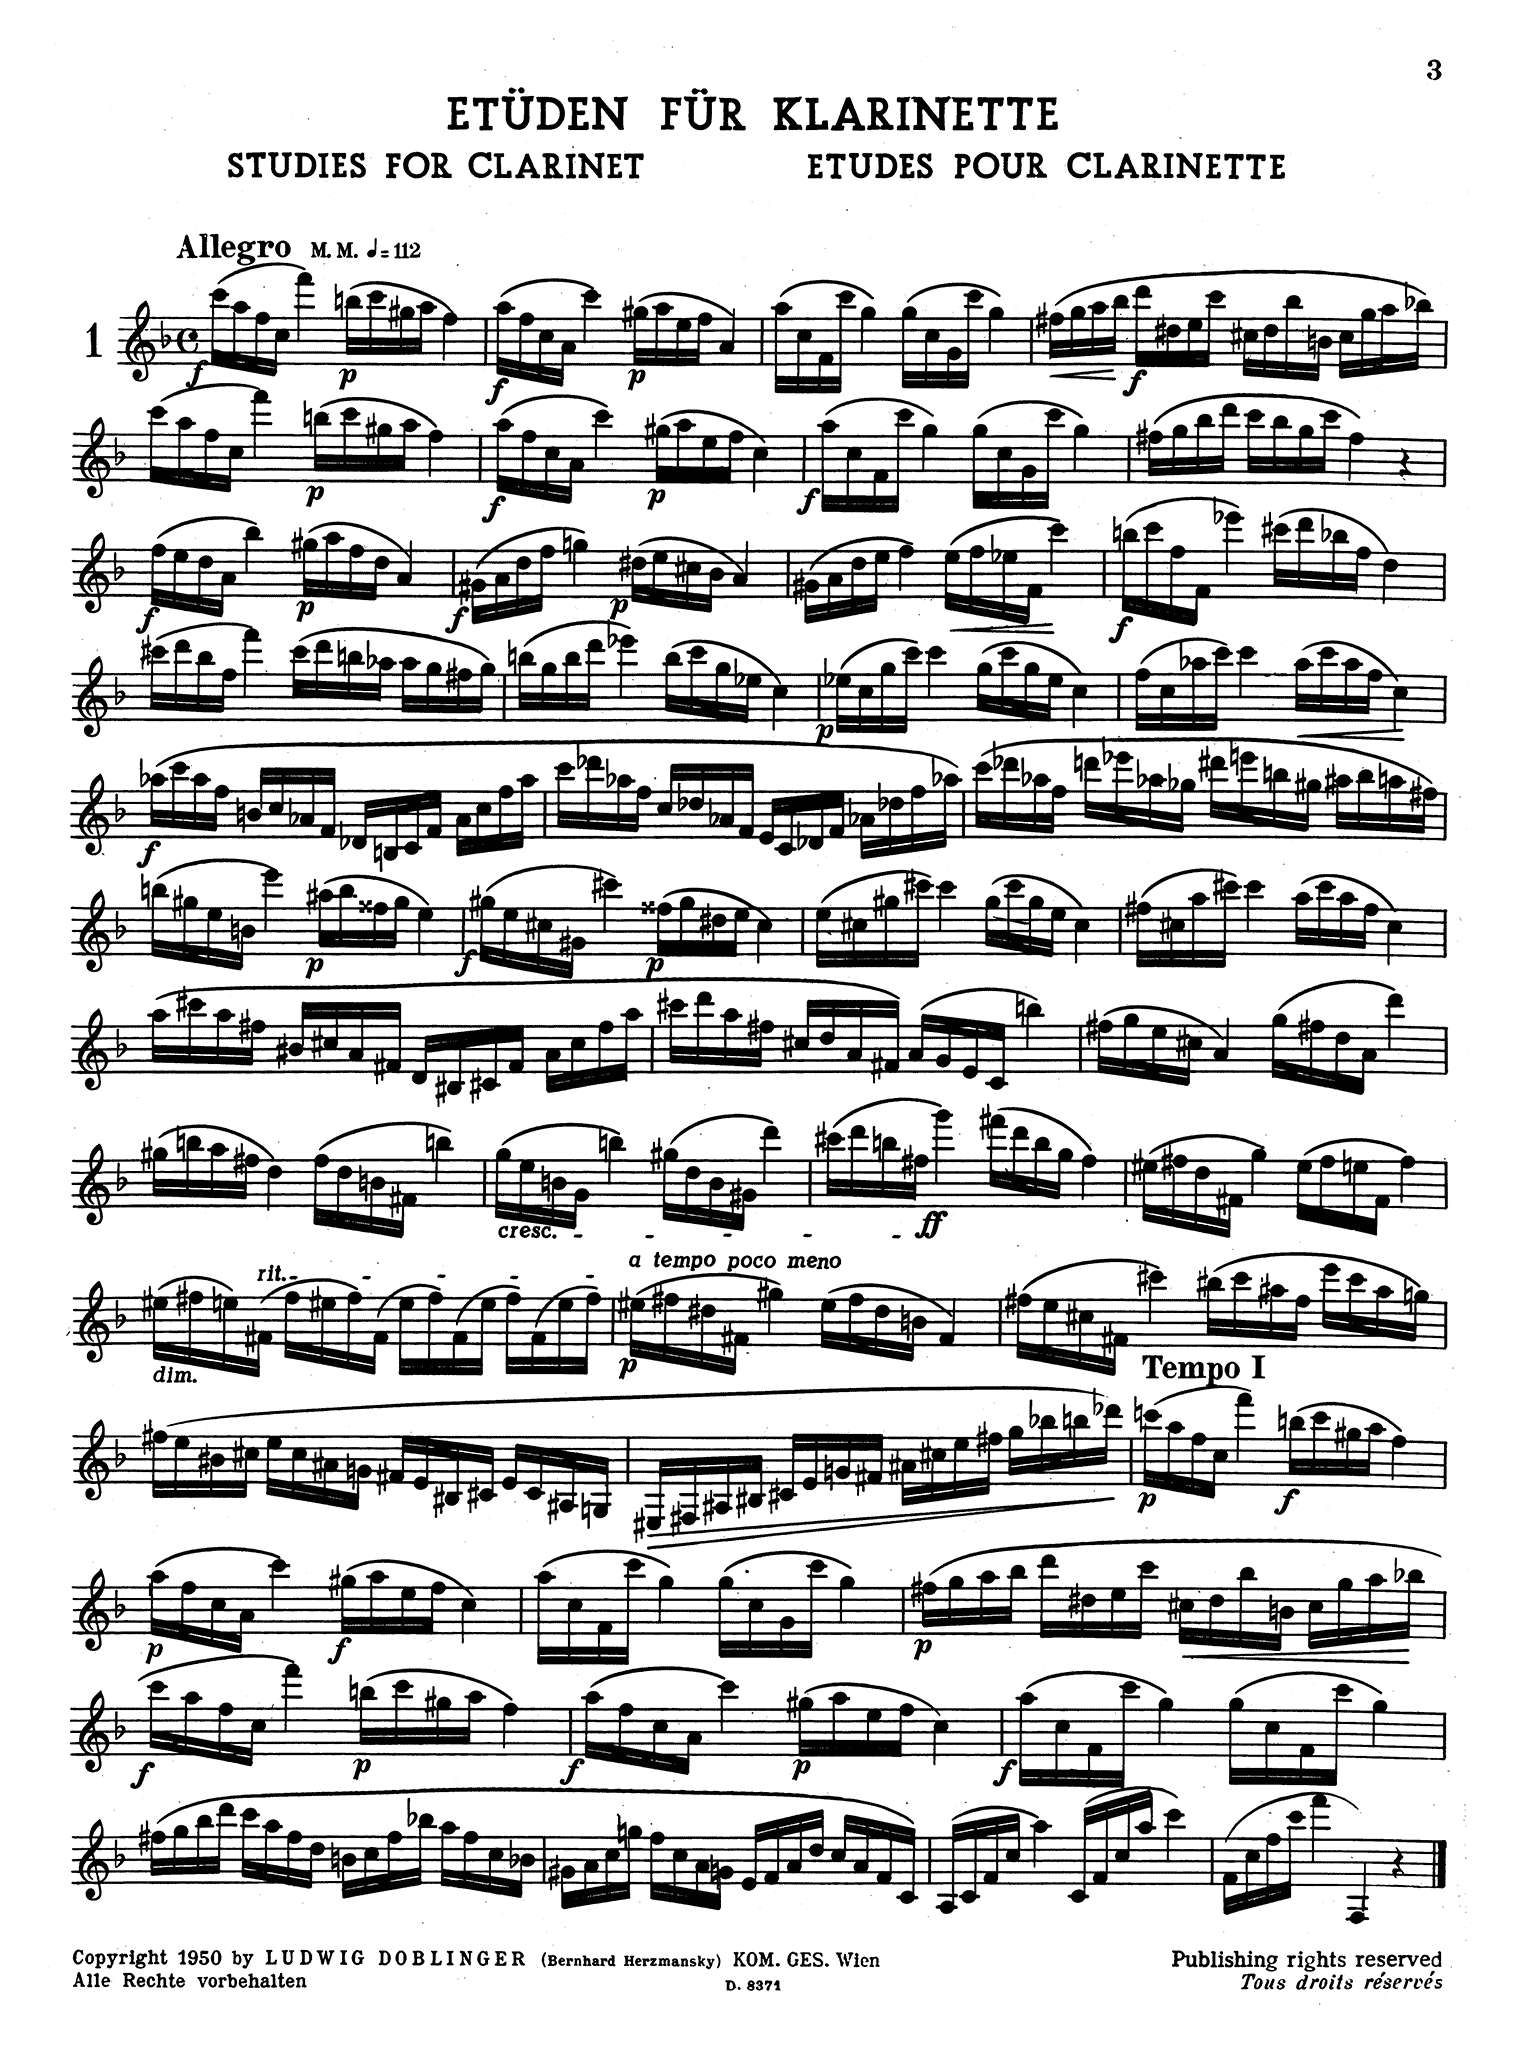 School for Clarinet, Book 3 Page 3